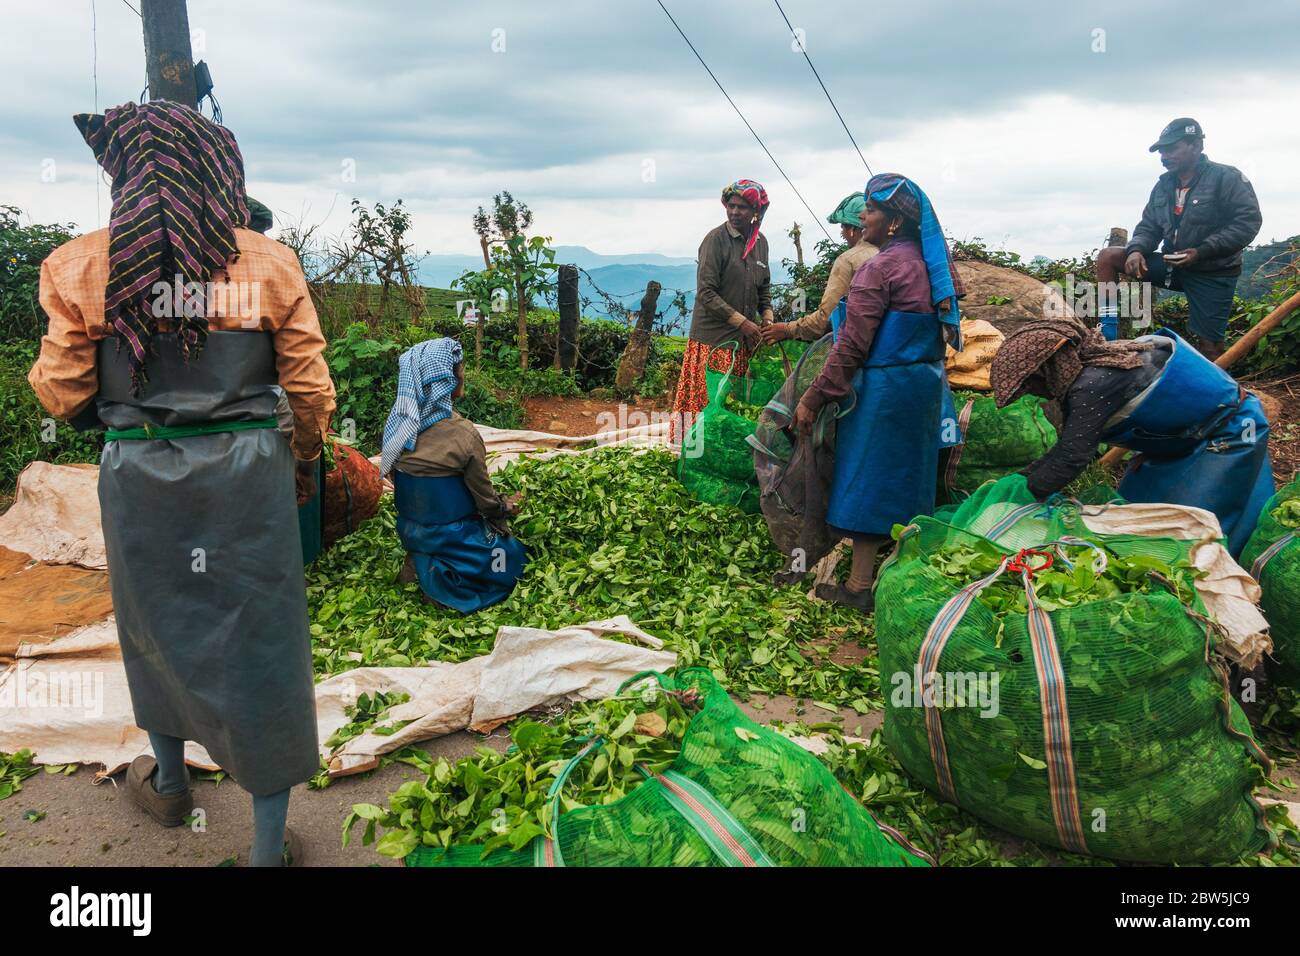 Female tea pickers unload and weigh bags of tea leaves harvested during the day in Munnar, India Stock Photo